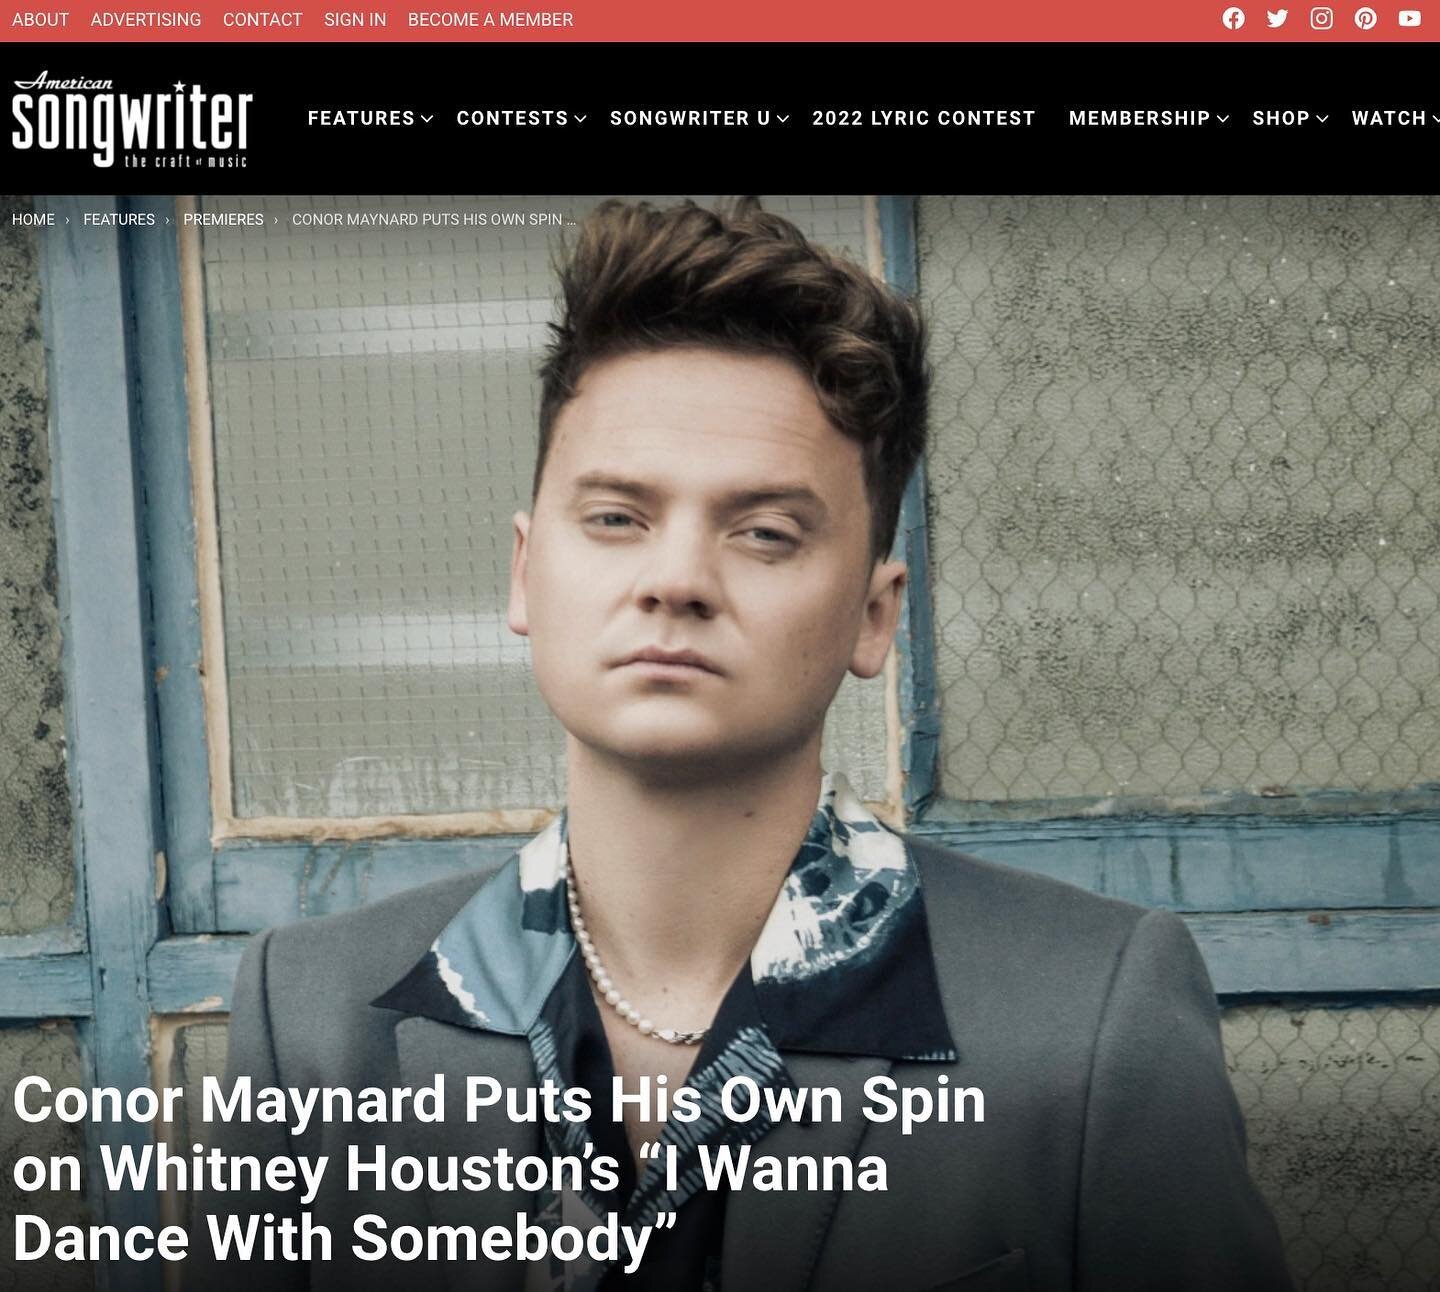 &ldquo;British singer/songwriter @conormaynard just released his own version of Whitney Houston&rsquo;s &lsquo;I Wanna Dance With Somebody,&rsquo; taking the ultimate party song and transforming it completely,&rdquo; @americansongwriter reports. &ldq